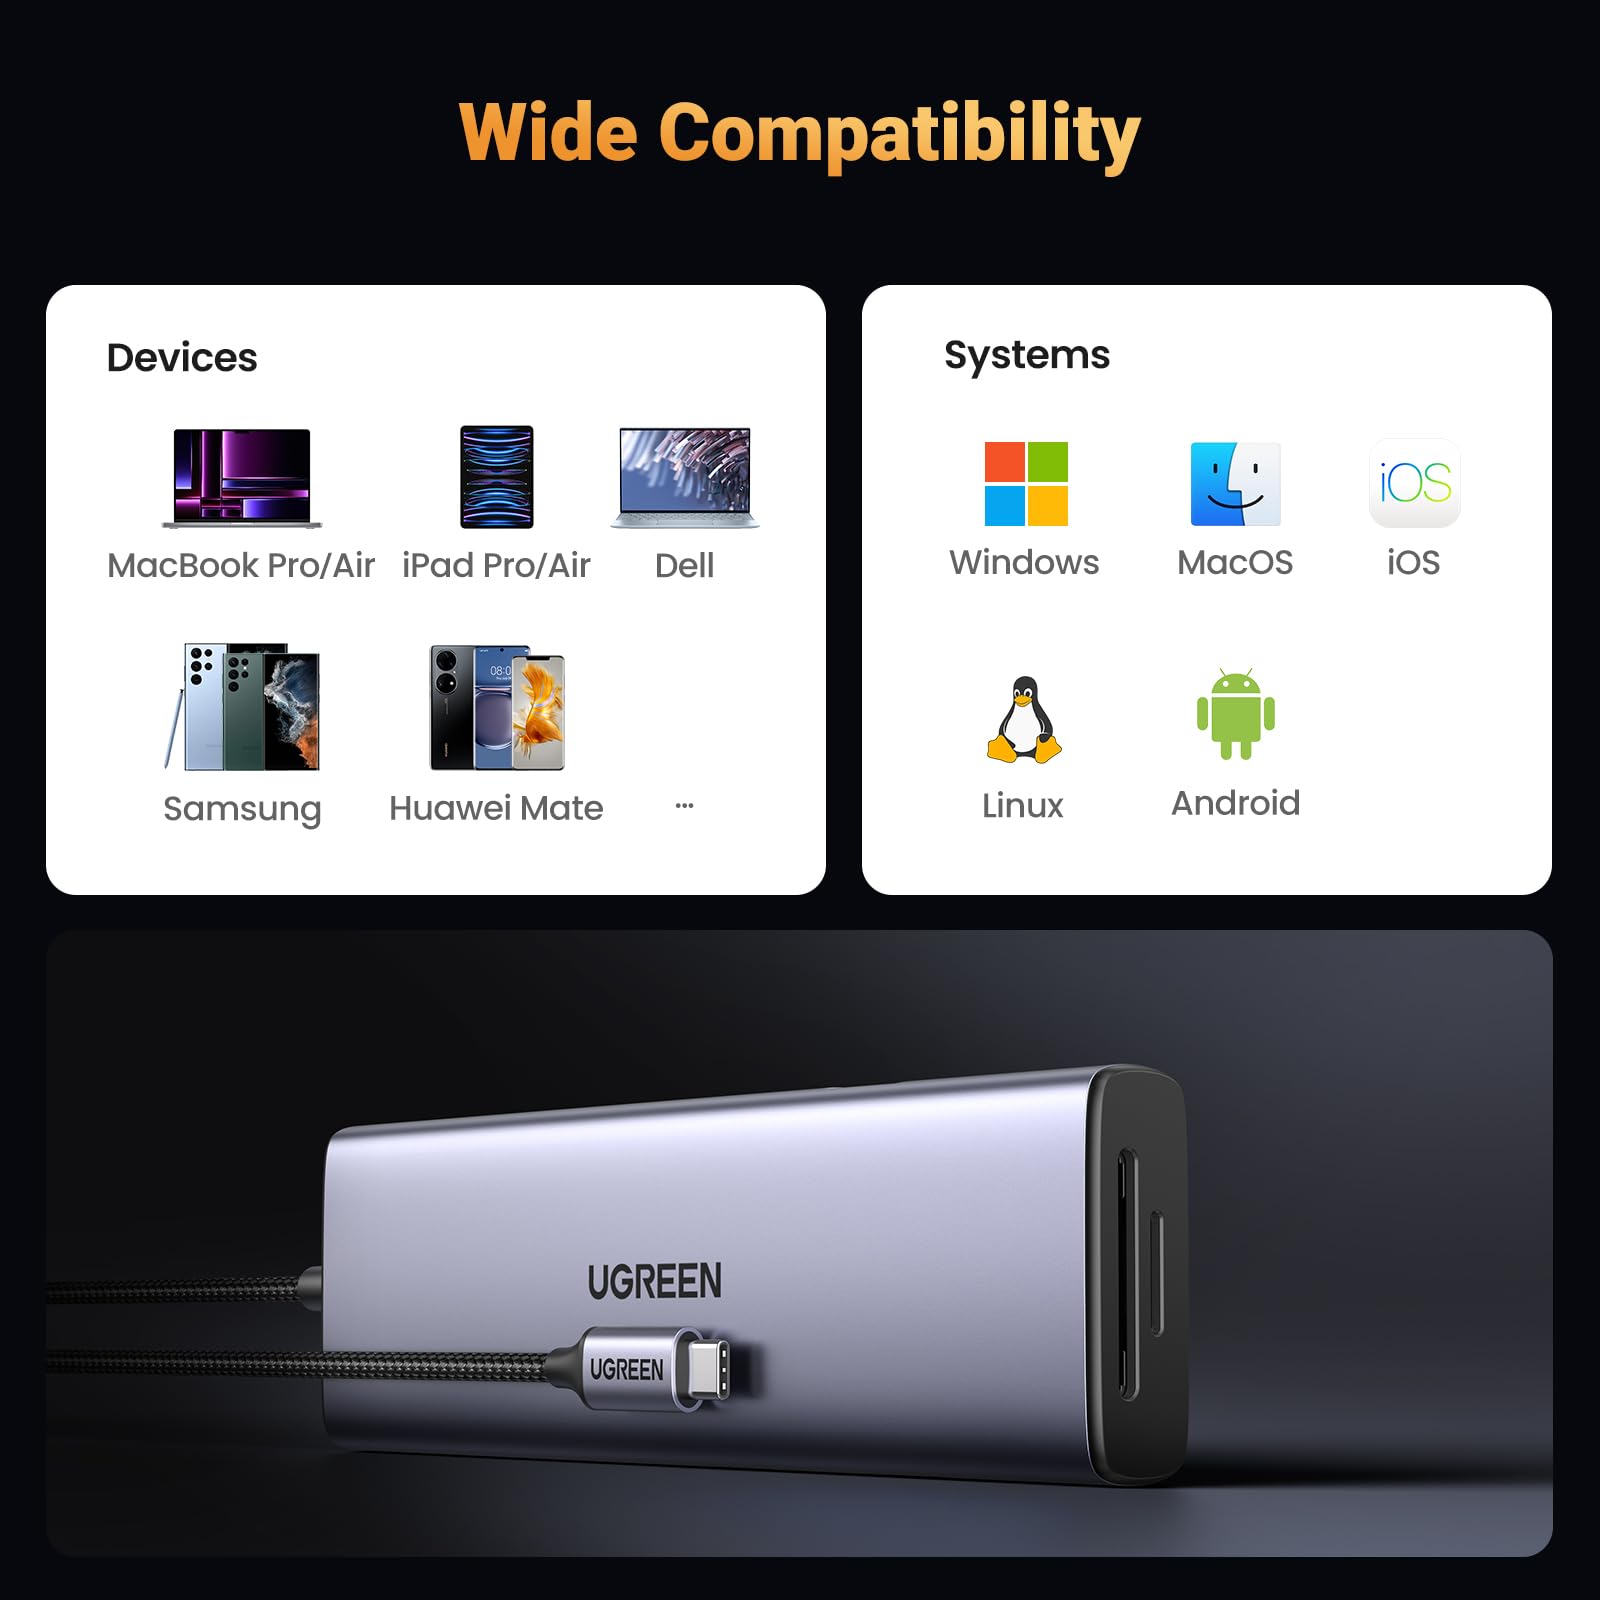 UGREEN Revodok USB C Hub 9-in-1, USB C Dock with 4K@60Hz HDMI, 5 Gbps USBC and USBA Data Ports, 1Gbps Ethernet, 100W PD, SD/TF Card Reader, Docking Station for MacBook Air/Pro, iPad, Dell XP and More